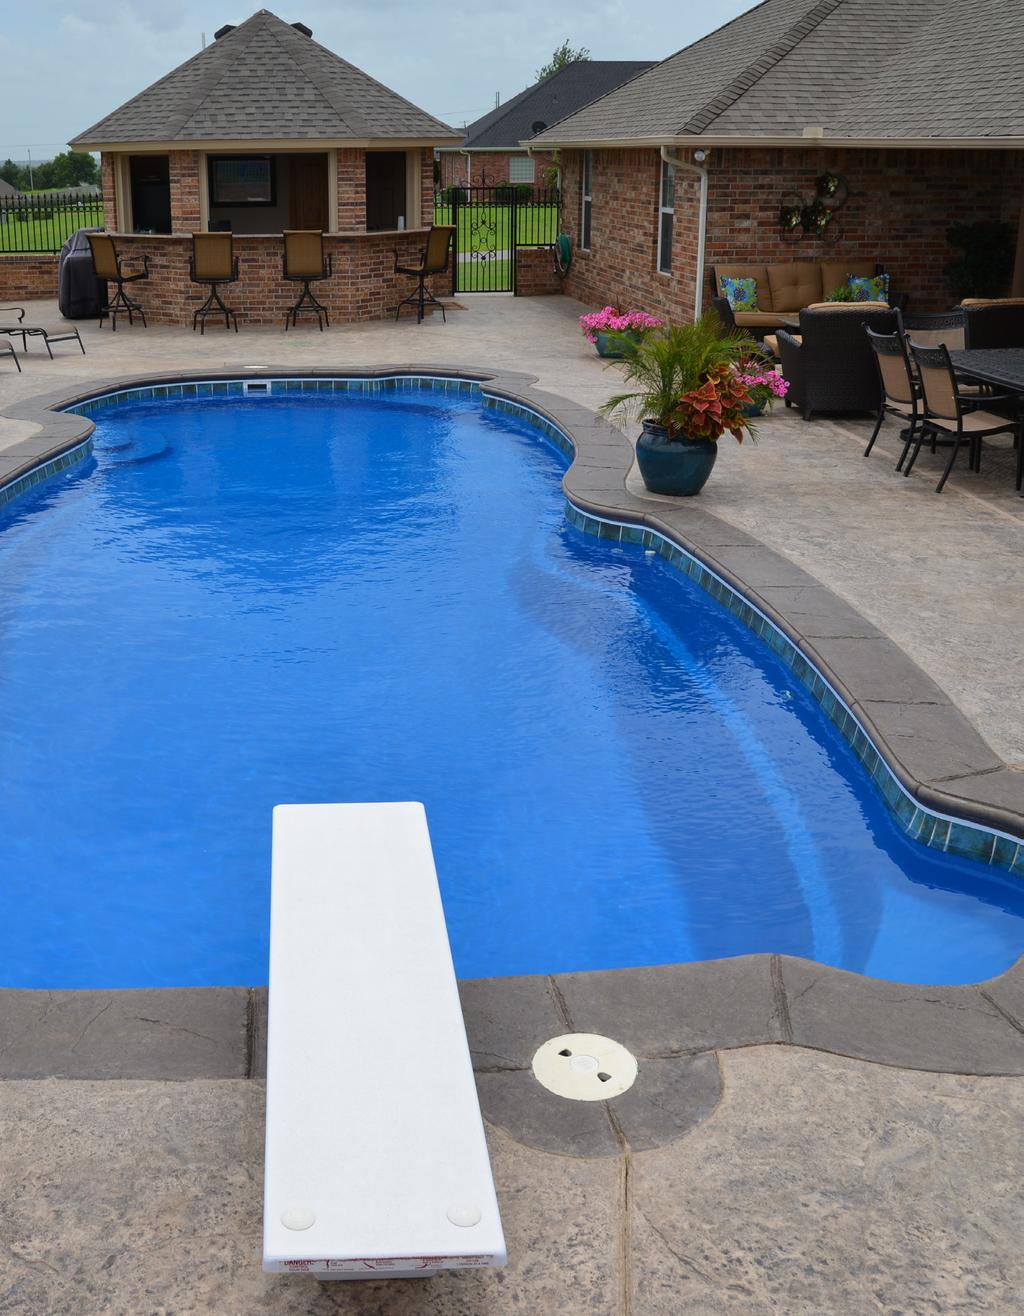 Myth #6: Fiberglass pools are expensive to install and are not durable. FALSE. Fiberglass pools on average cost the same to install as a concrete pool.